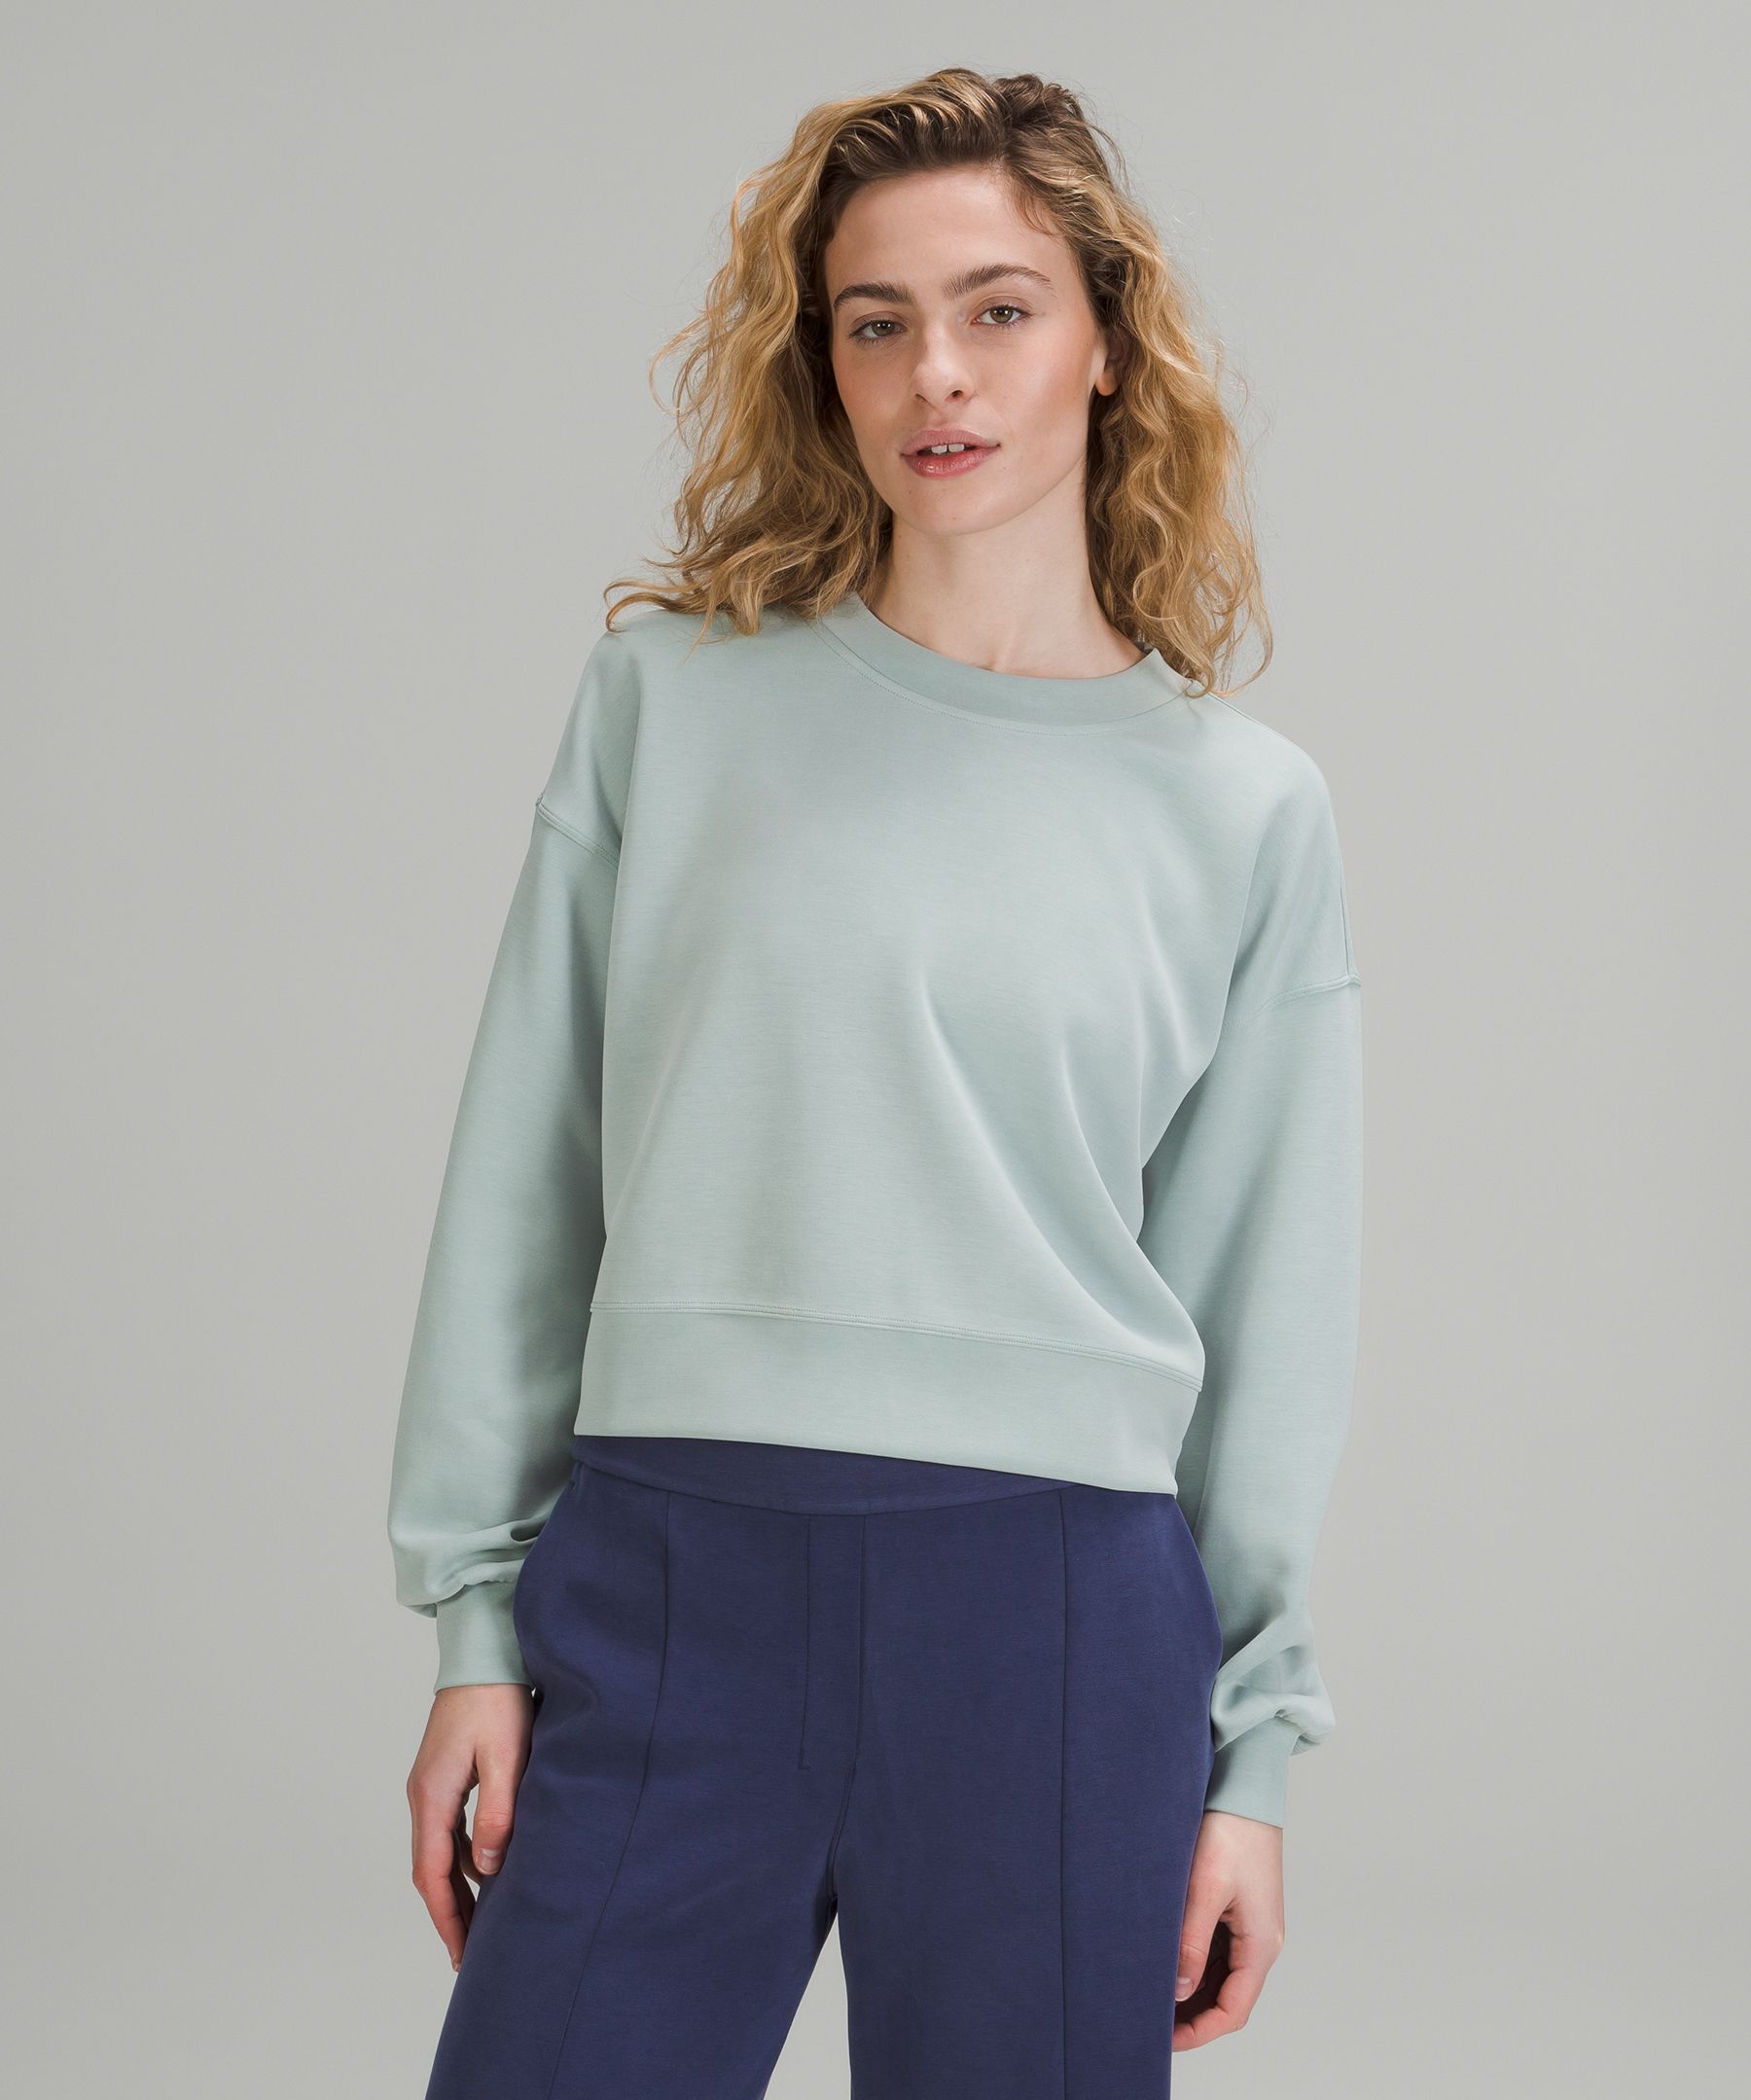 Lululemon Cropped Sweatshirt Blue Size 6 - $45 (33% Off Retail) - From Laura